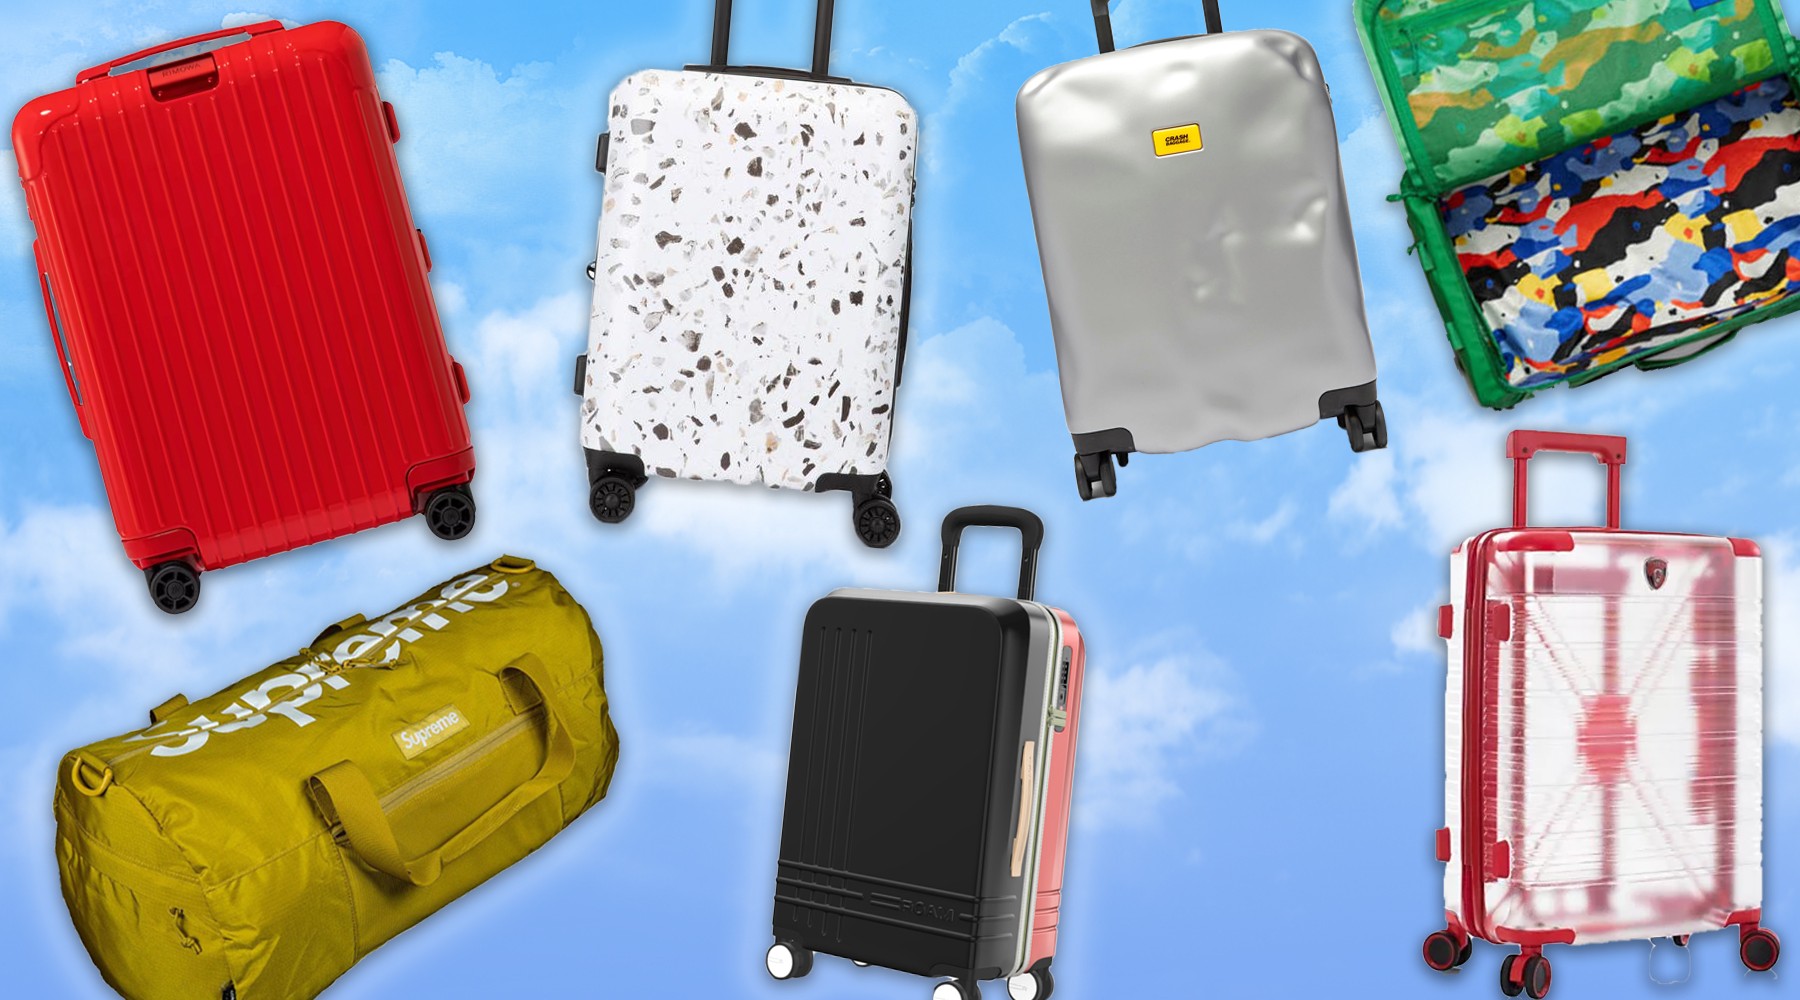 Best Carry On Luggage: 7 Bags Tested Head-to-Head 